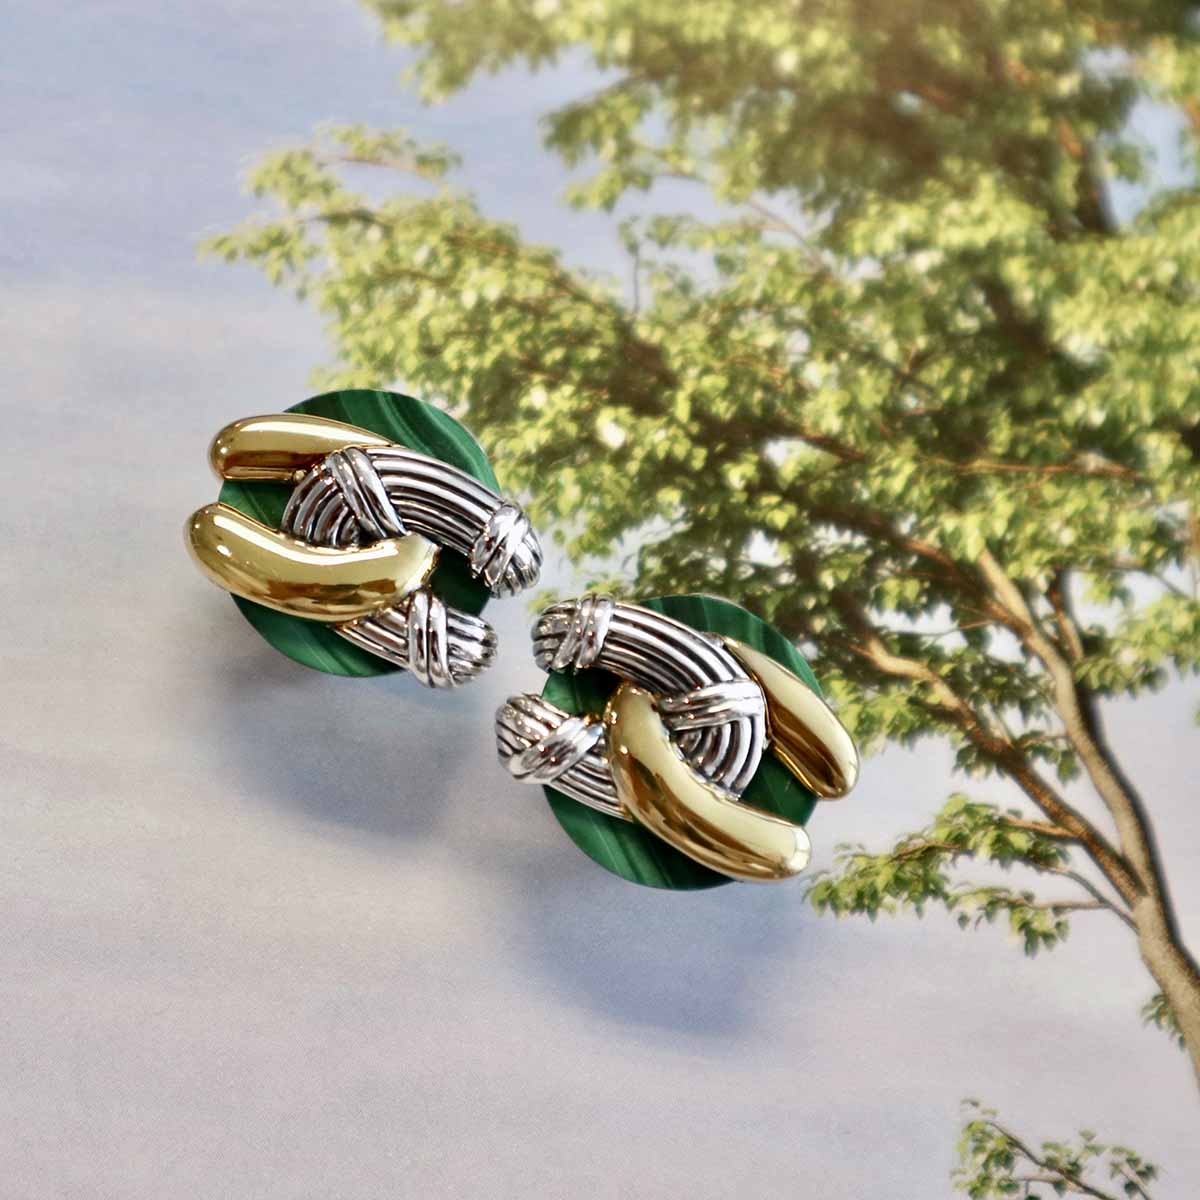 Southampton Disc Knot Earrings in two tone sterling silver with malachite